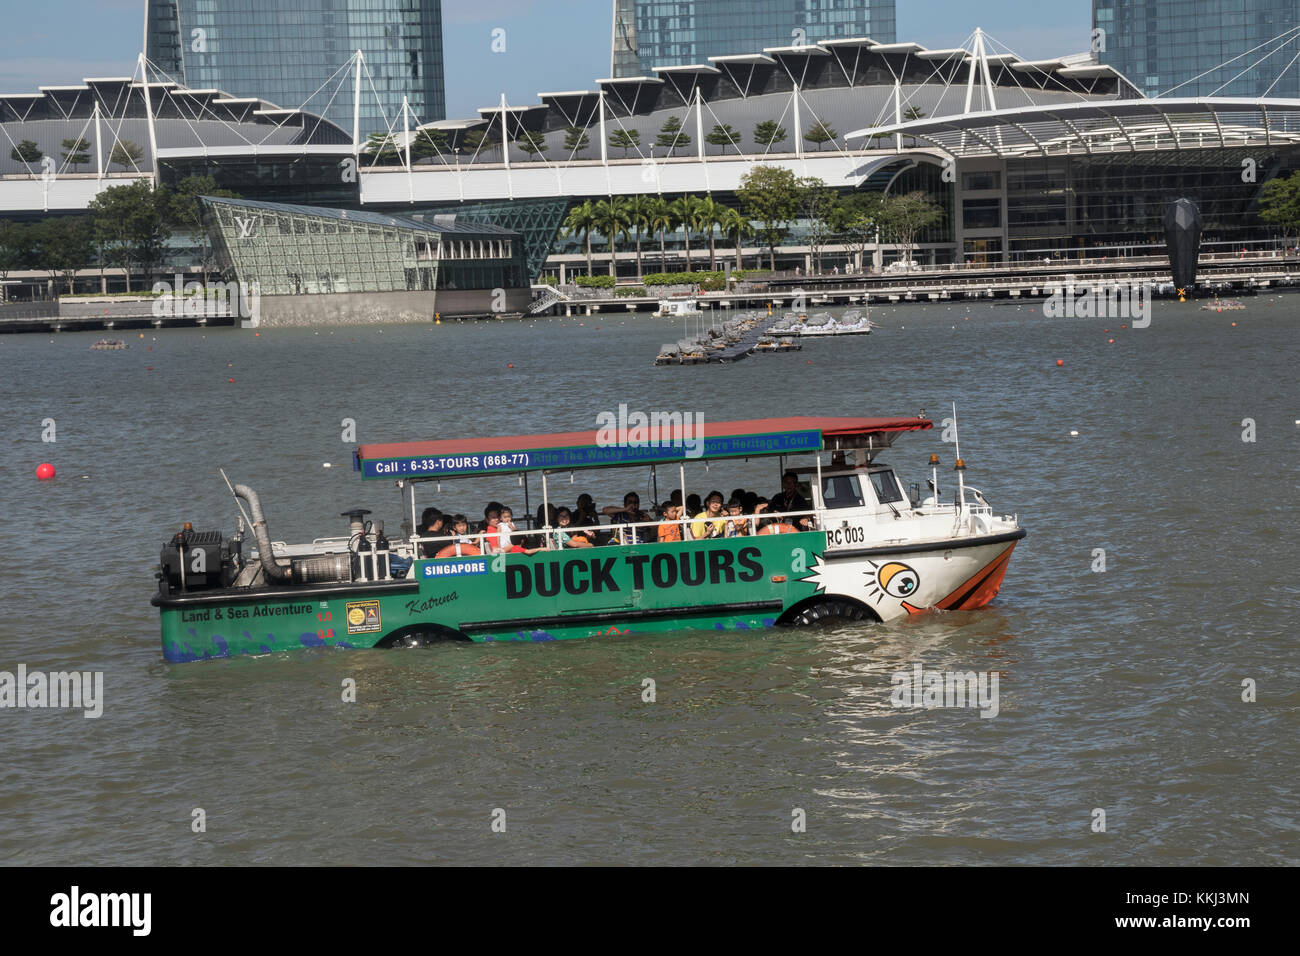 Marina Bay in Singapore at the mouth of the Singapore River with a Duck tourist boat in the foreground Stock Photo